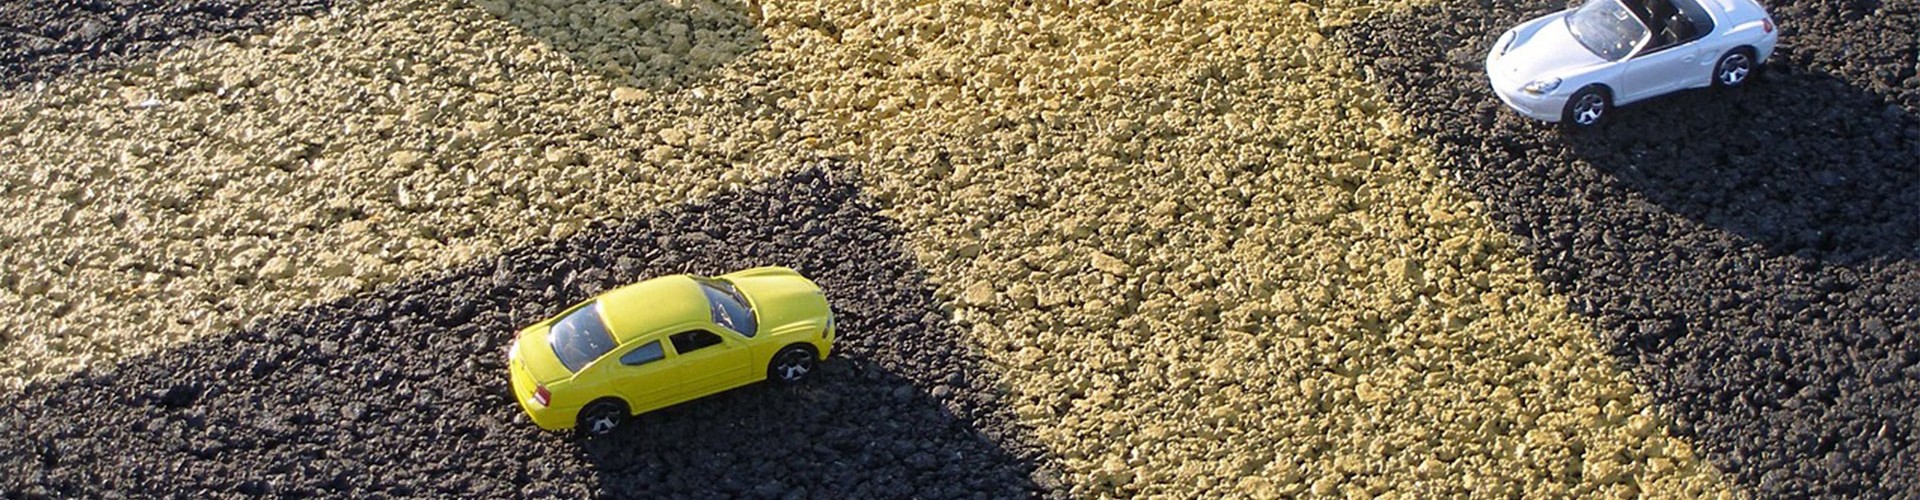 toy cars in car park 